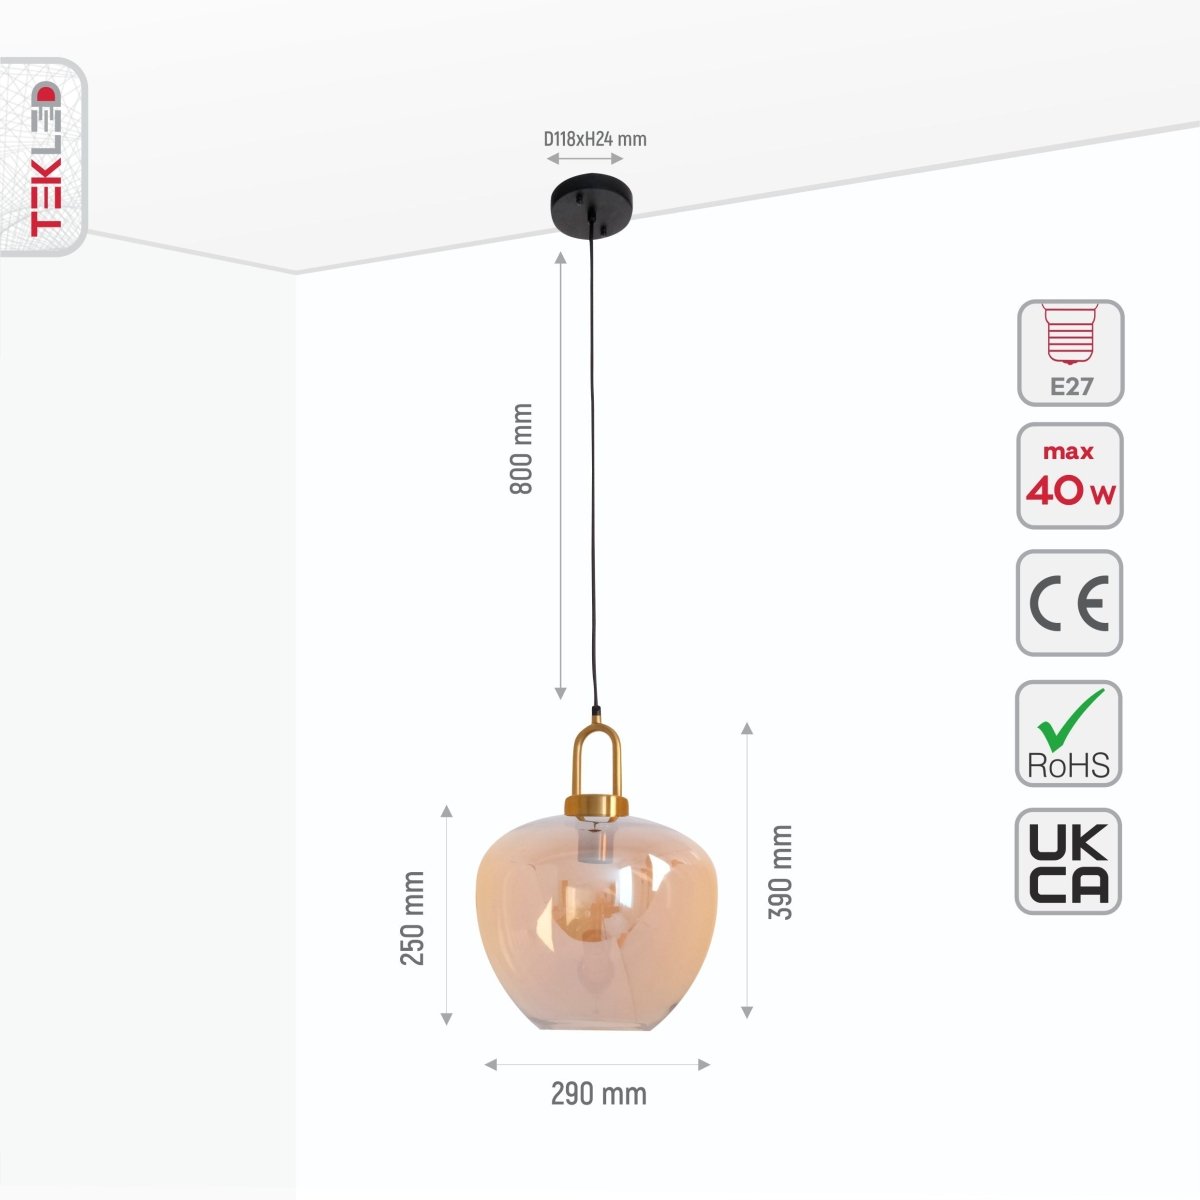 Size and specs of Amber Glass Globe Pendant Light with E27 Fitting | TEKLED 150-18348